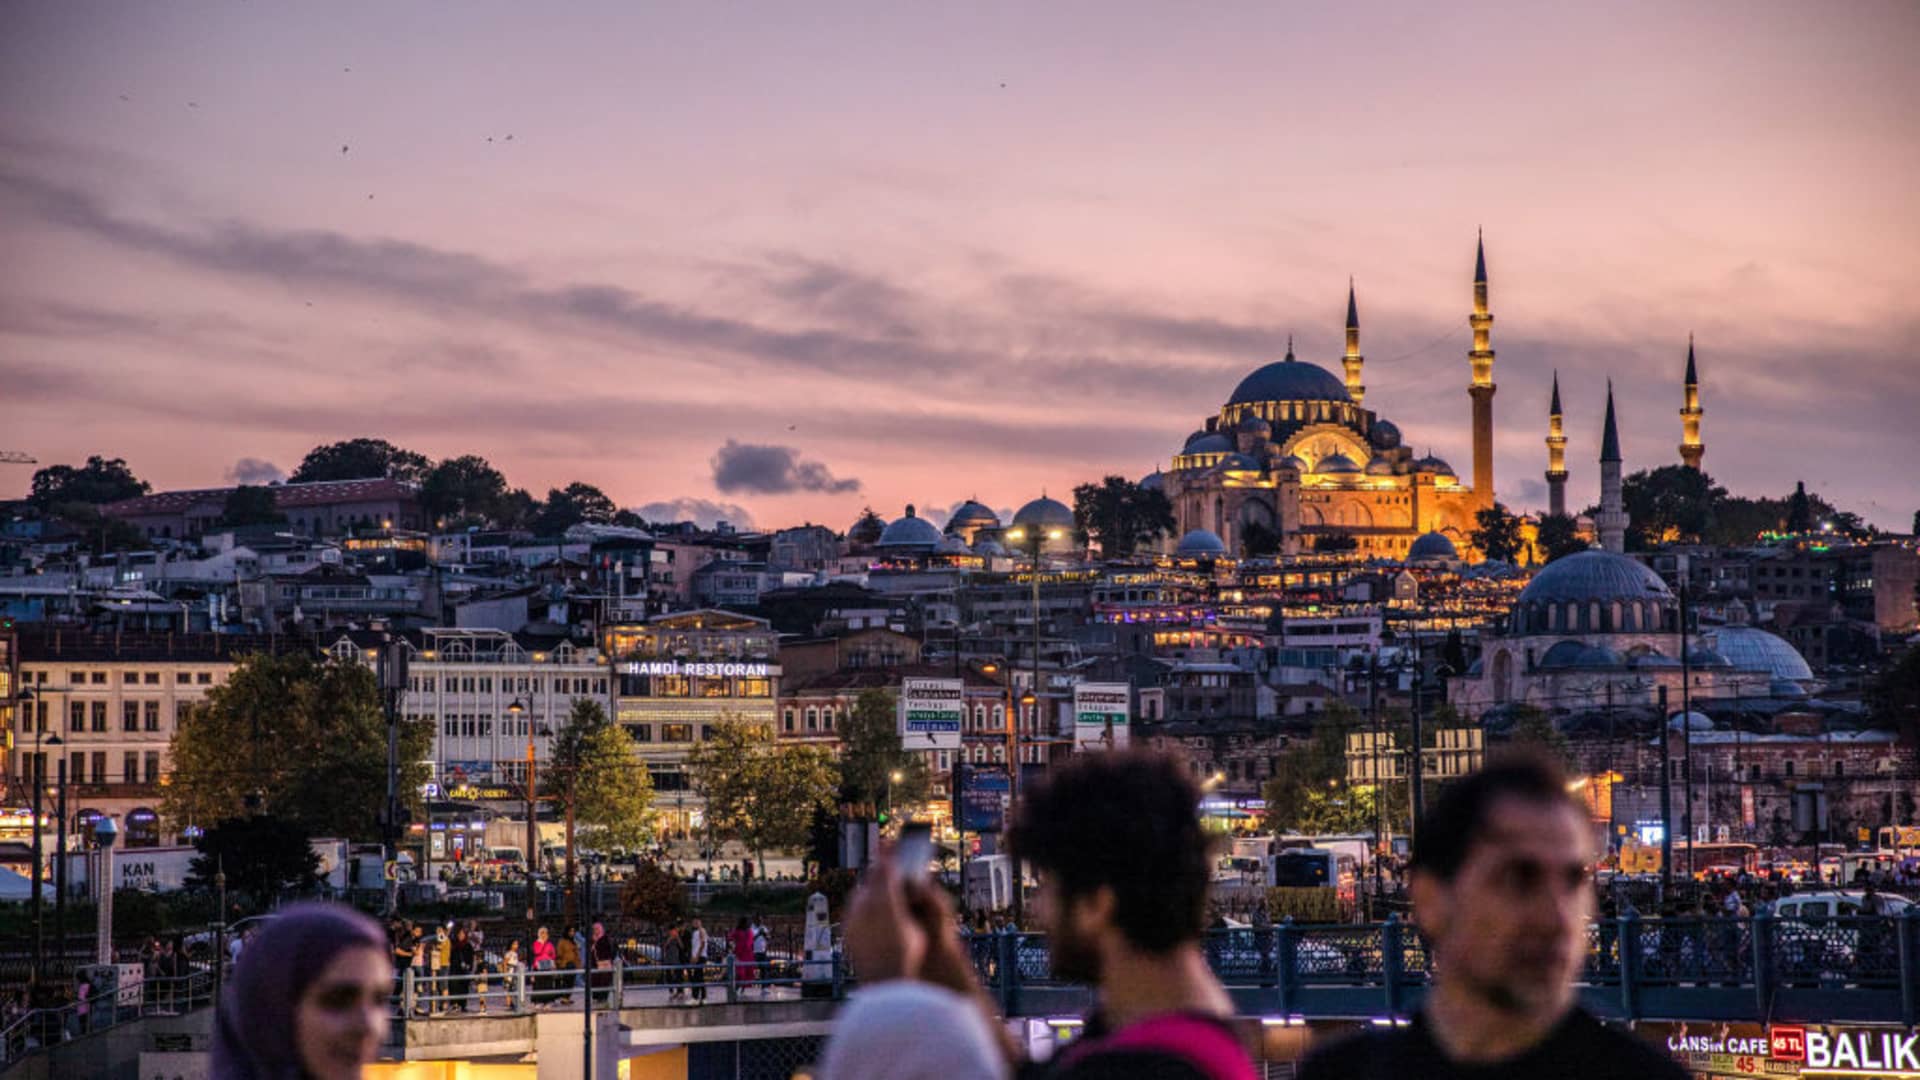 Turkey cuts interest rates again as the country struggles with inflation